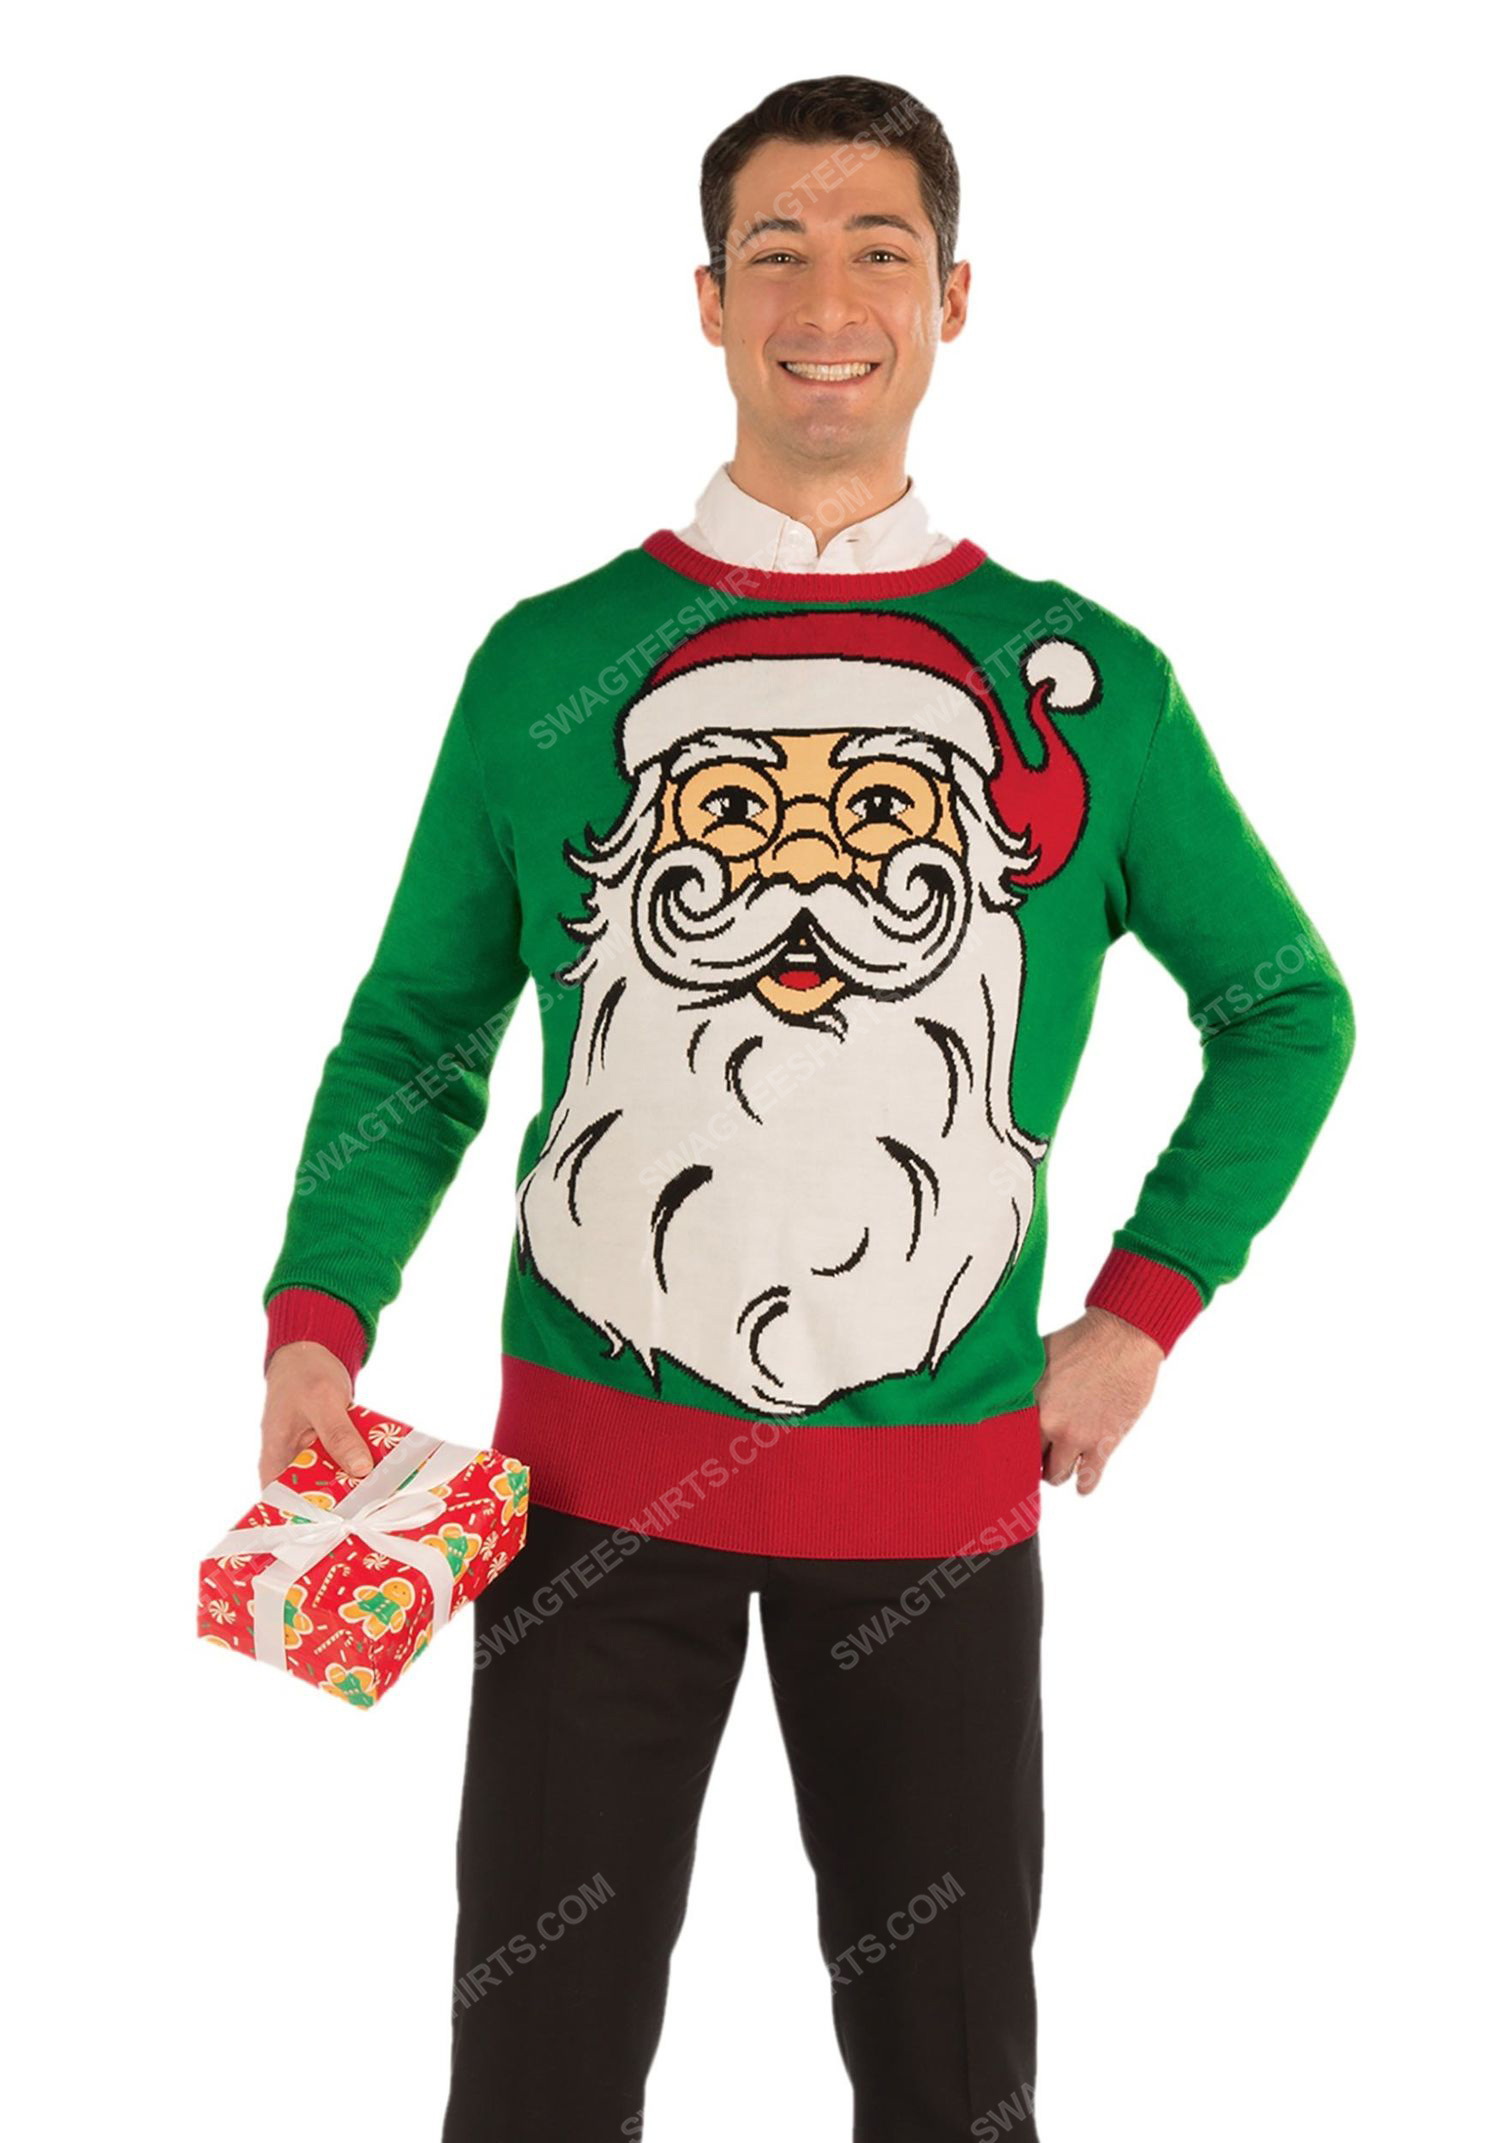 [special edition] Christmas holiday hipster santa full print ugly christmas sweater – maria